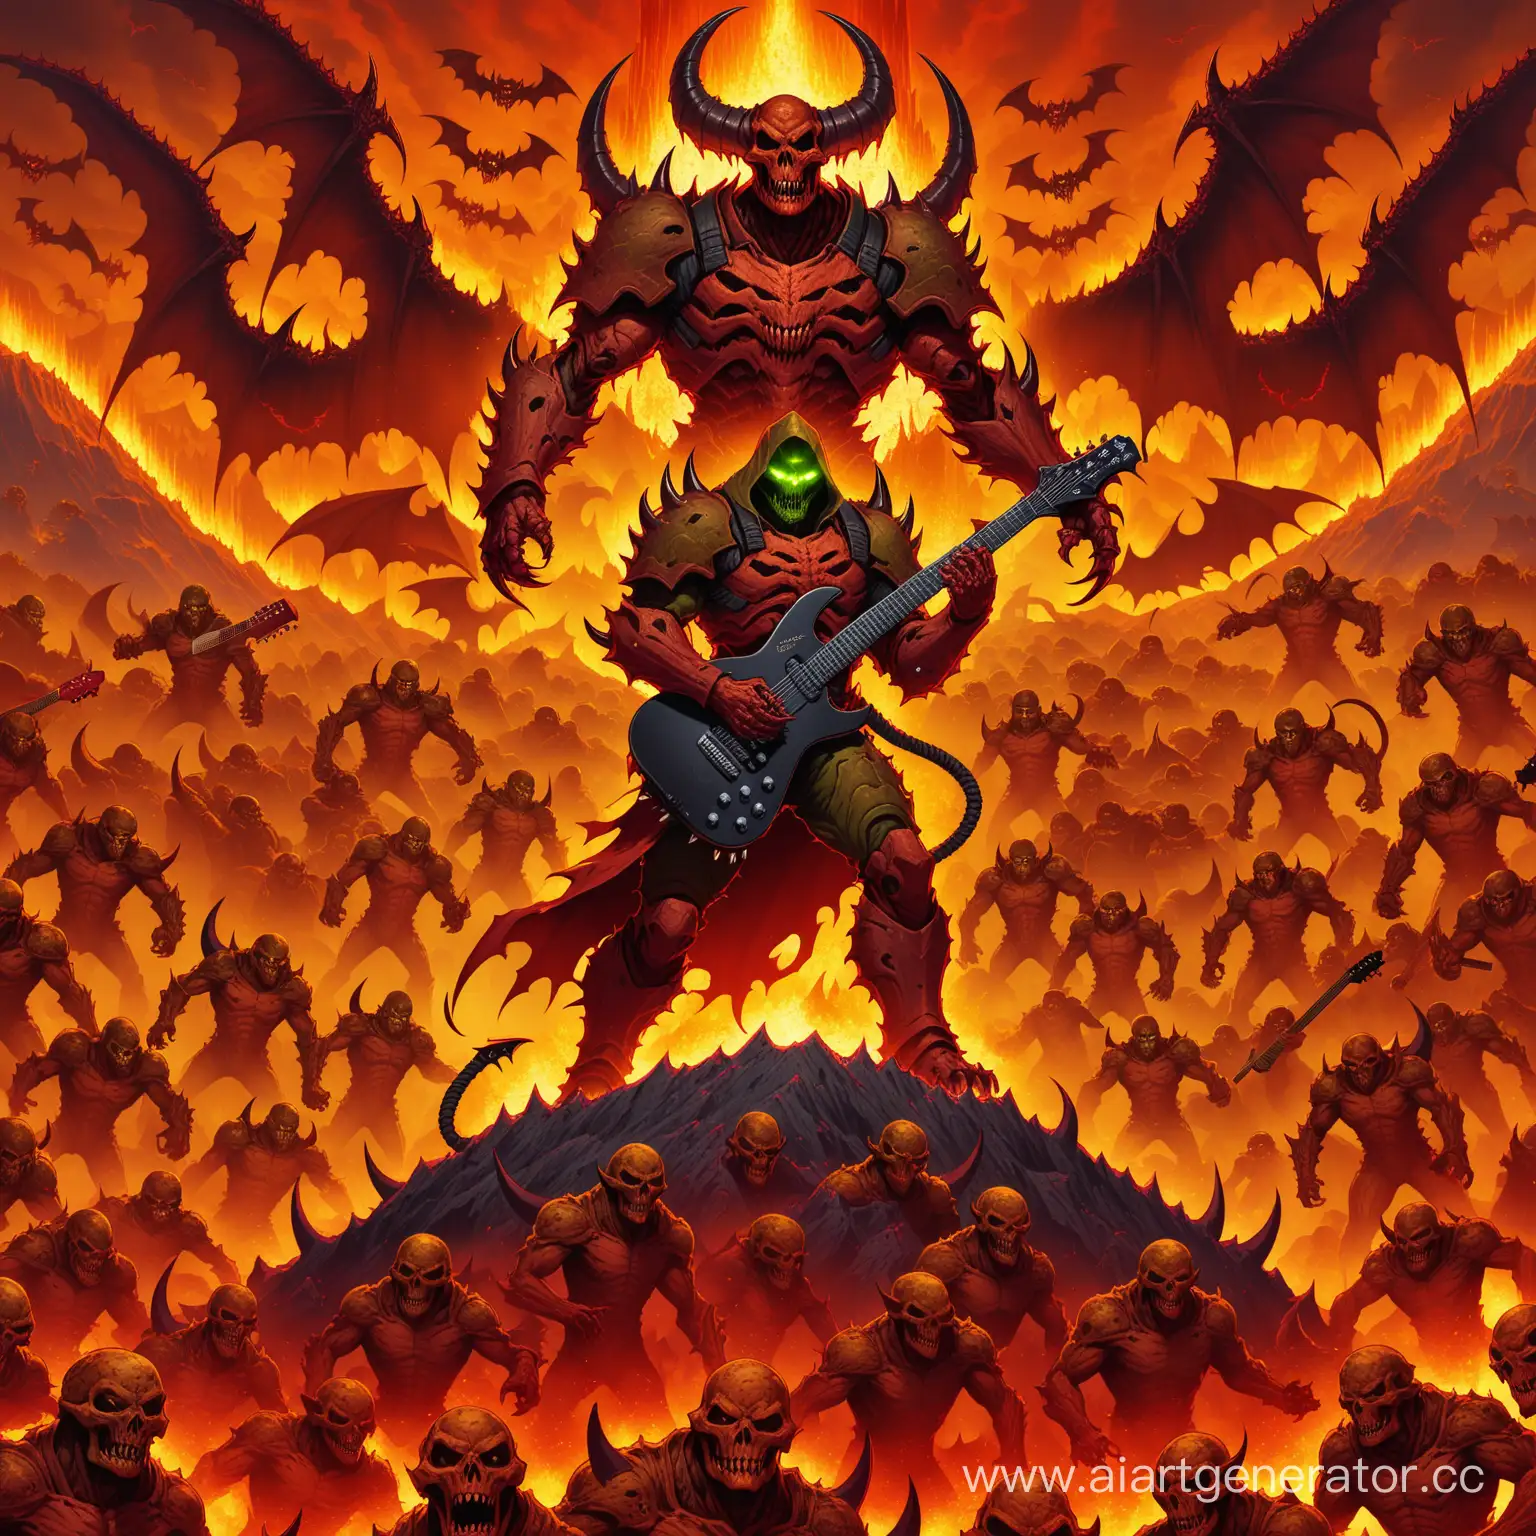 Doom-Slayer-Shreds-on-a-Mountain-of-Demon-Corpses-with-a-Demonic-Guitar